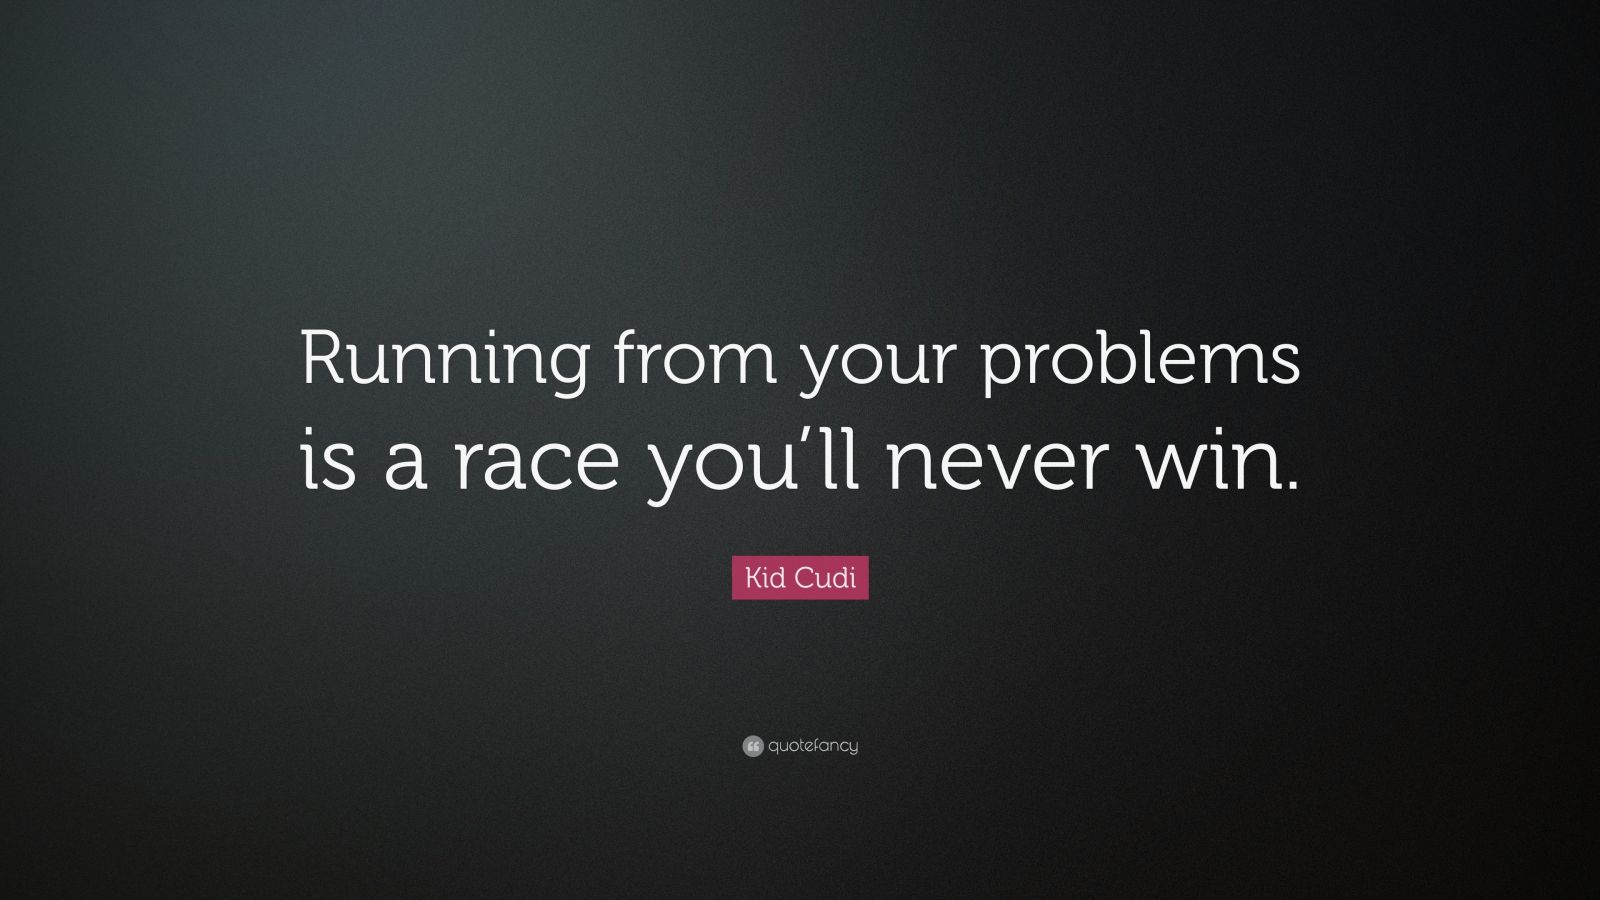 Kid Cudi Quote: “Running from your problems is a race you’ll never win ...